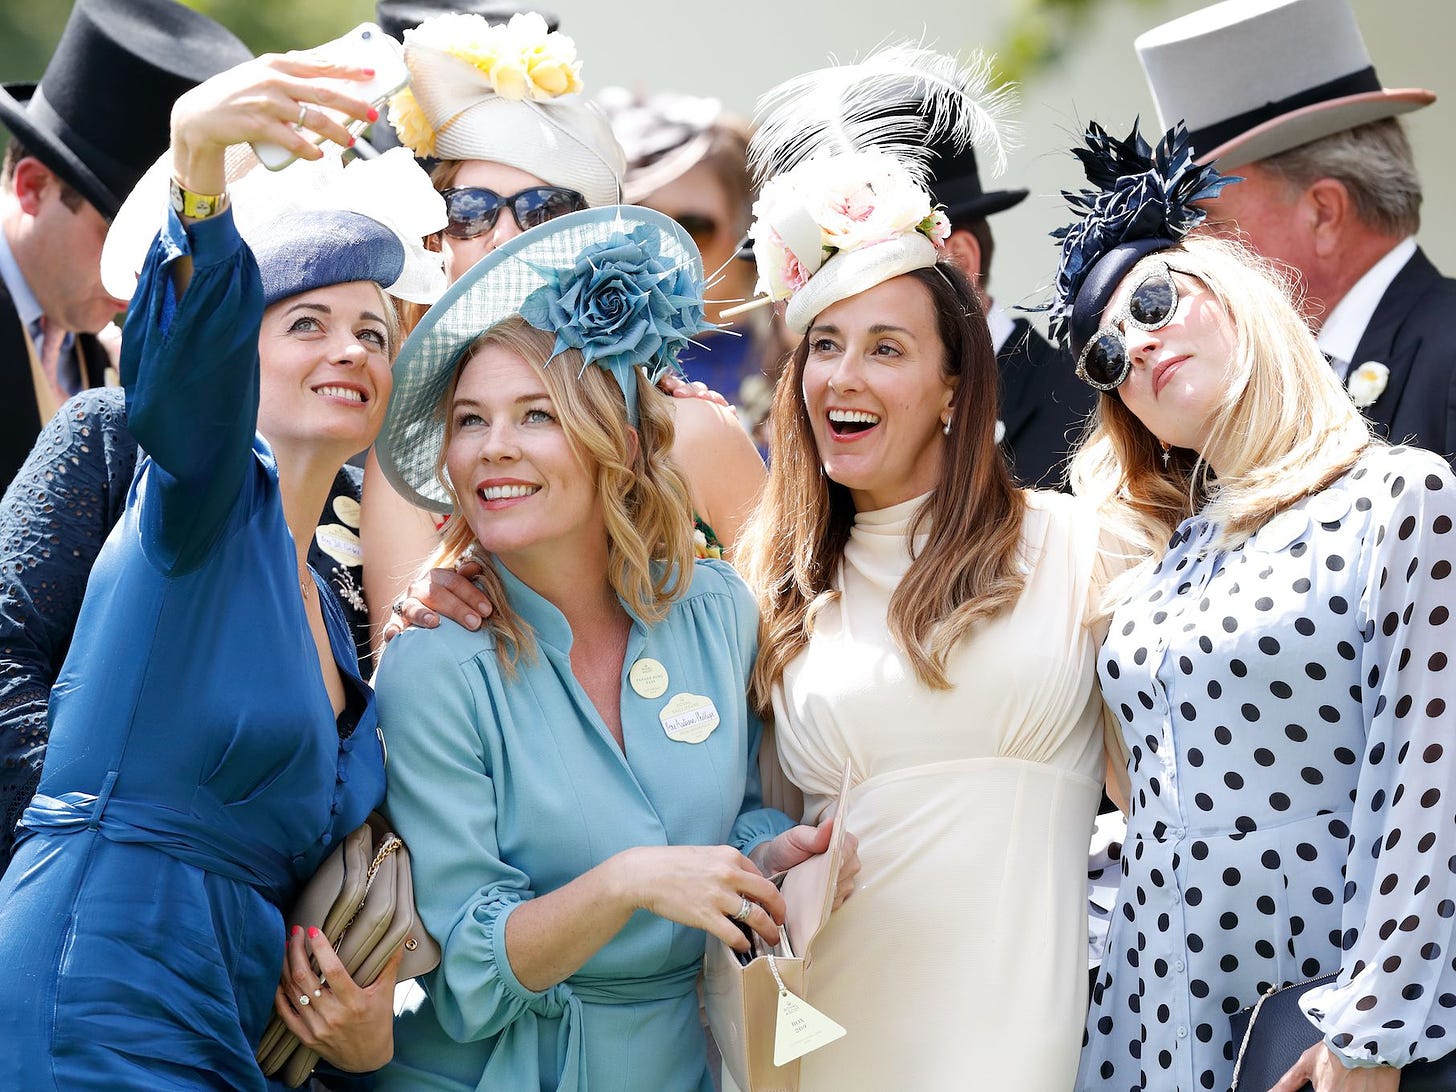 The Royal Ascot Horse Race Encourages Guests to Wear Secondhand Outfits